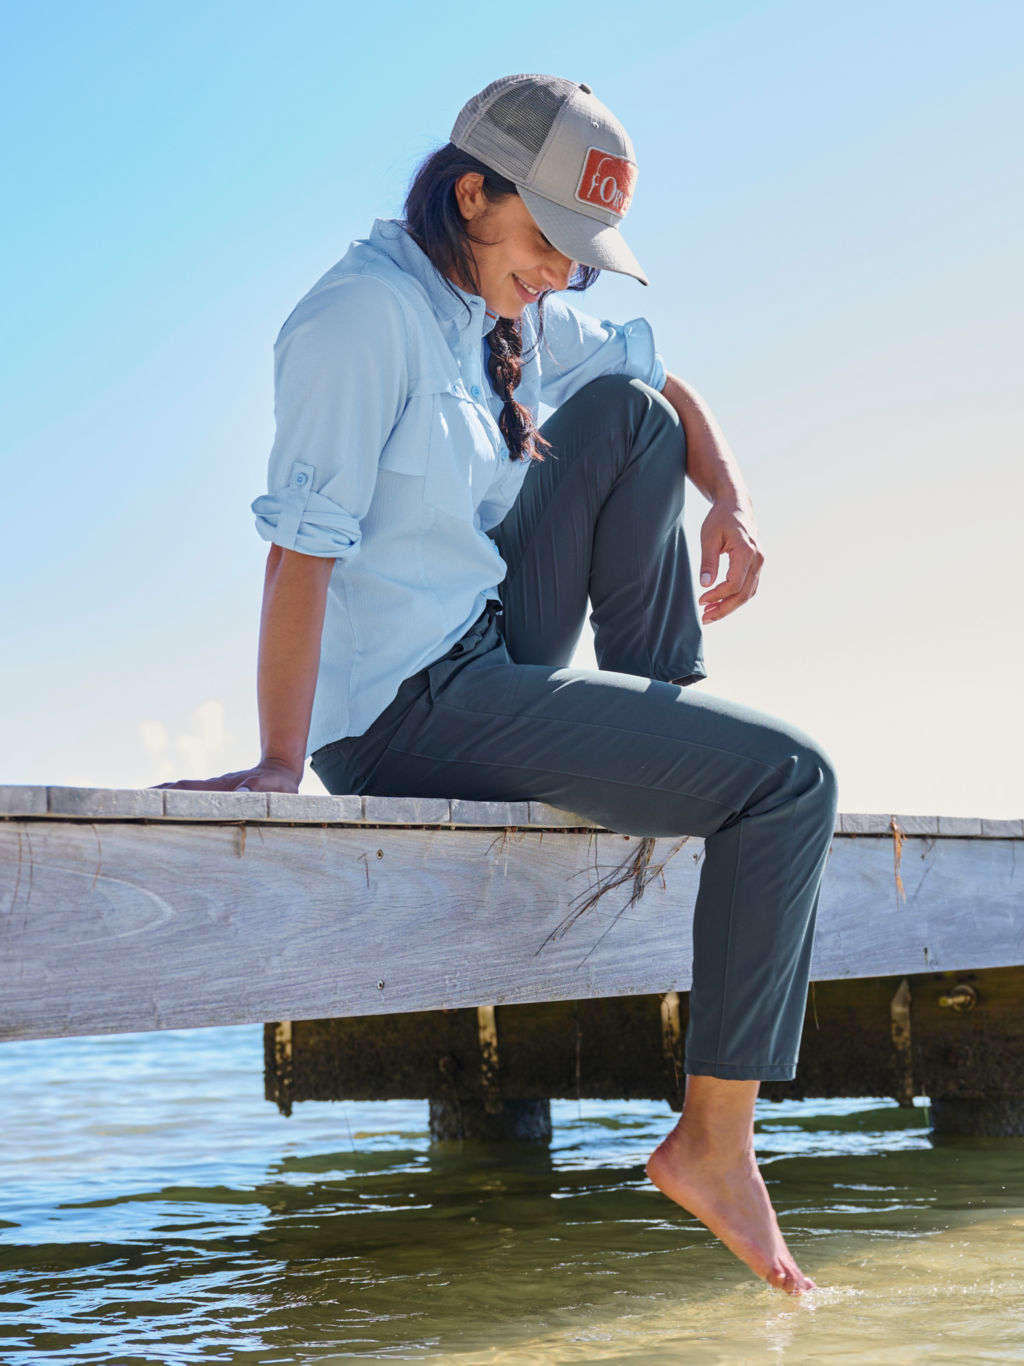 A woman sitting on the edge of a wooden dock with her toes dangling in the water.  Wearing a trucker hat, light blue button down shirt and dark blue pants.